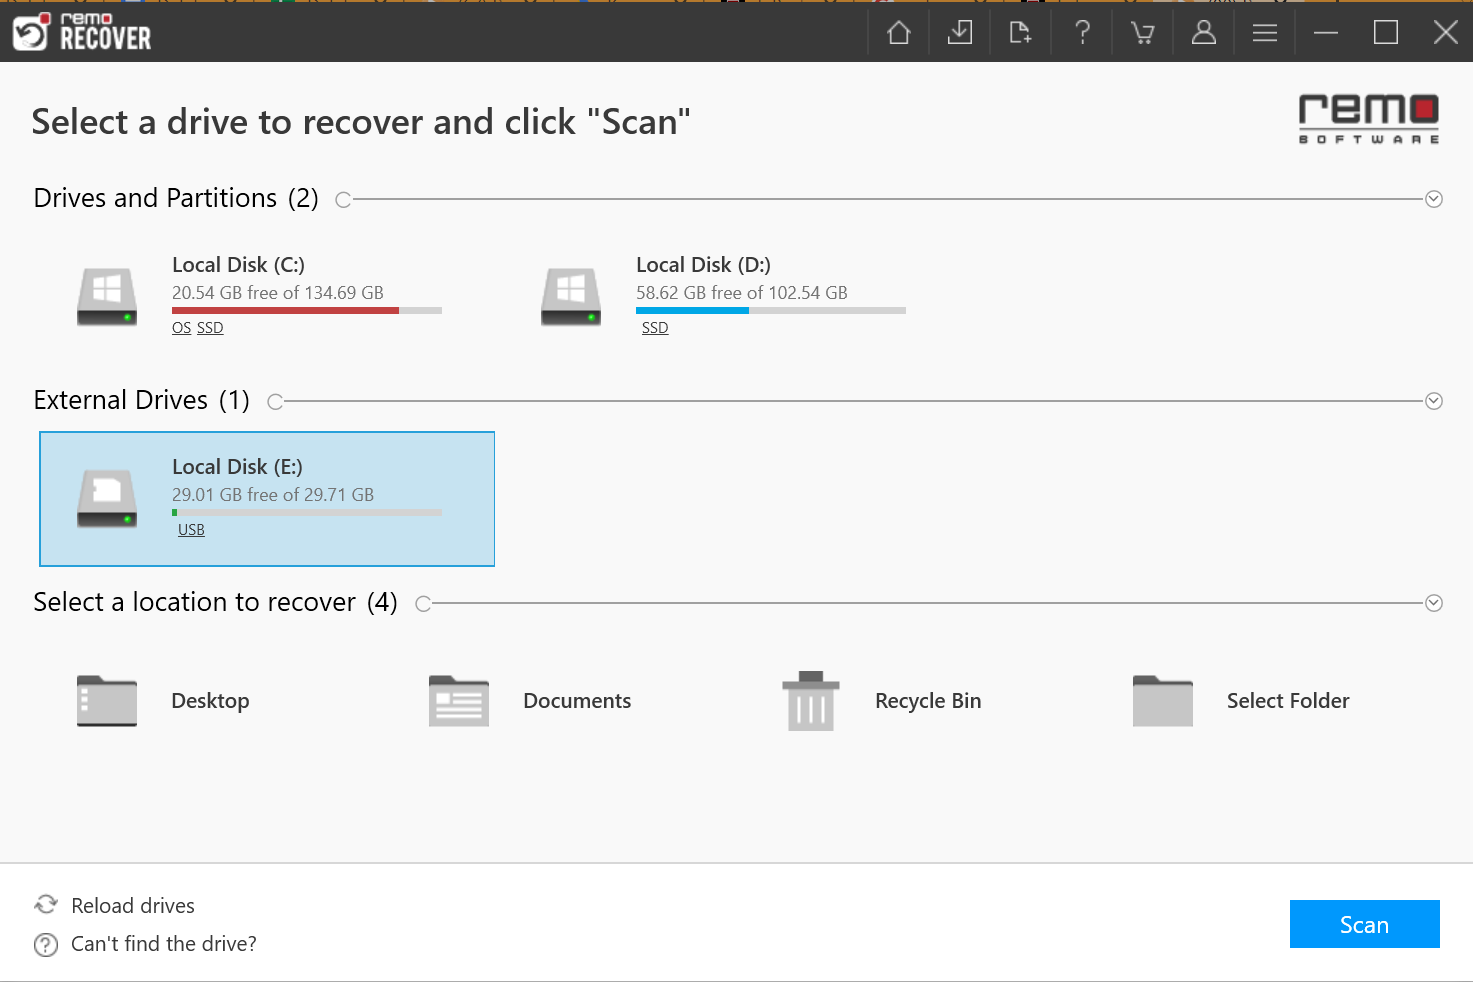 How to Recover Files from SD Card That Won’t Read - Main Screen